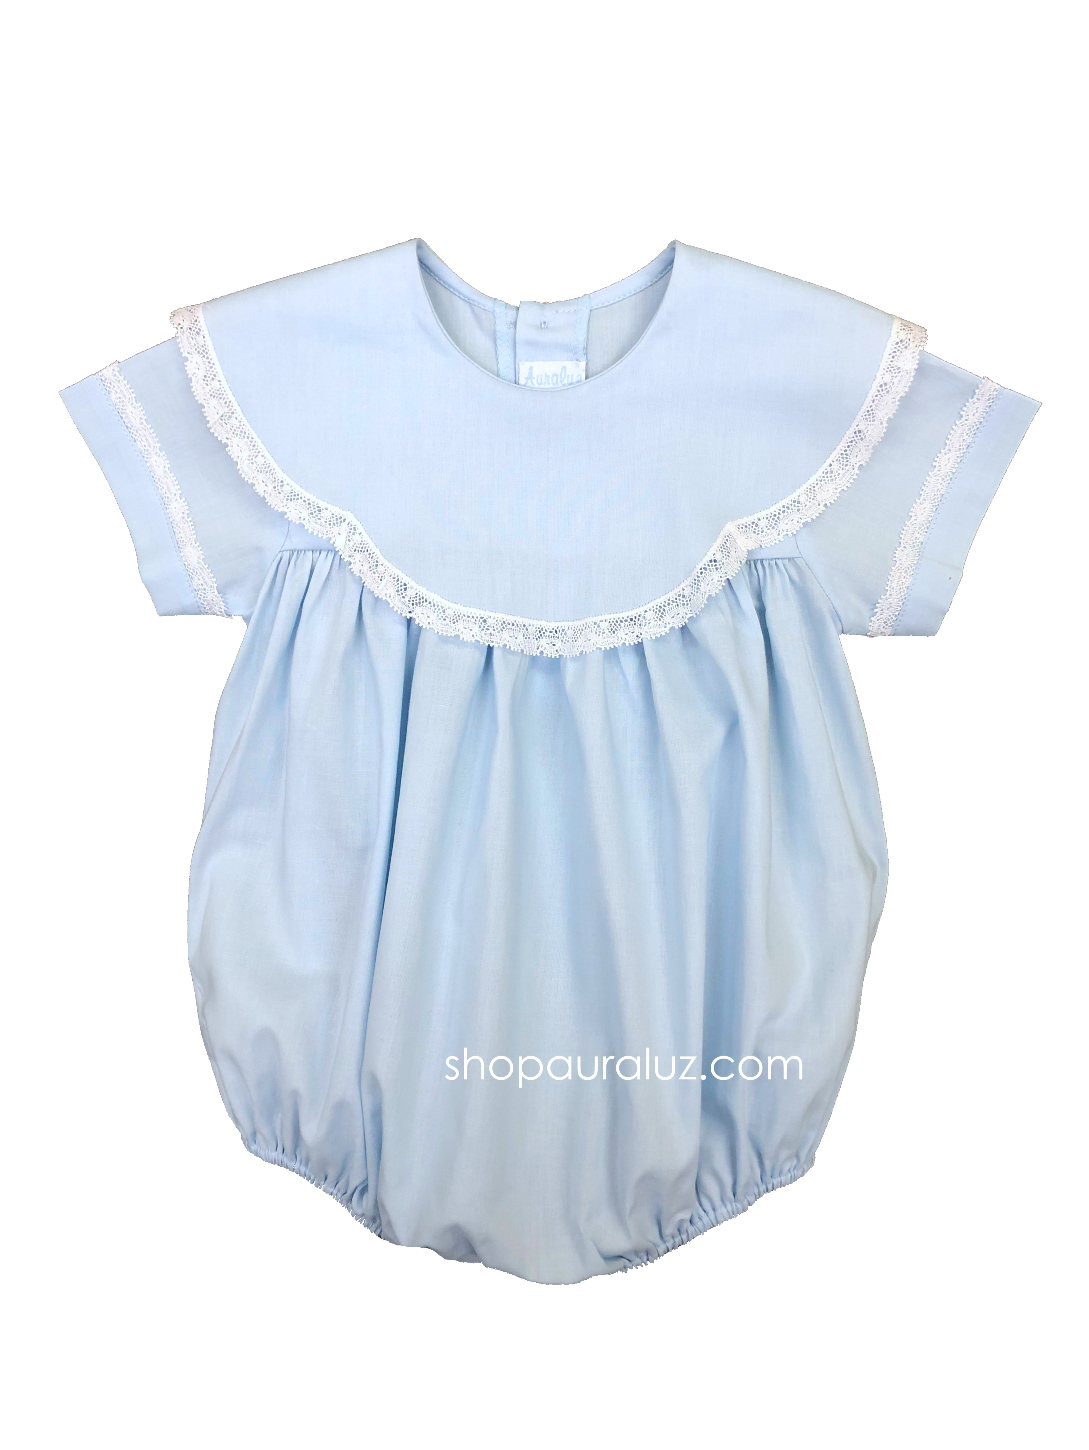 Auraluz Bubble...Blue with white lace, scalloped round collar